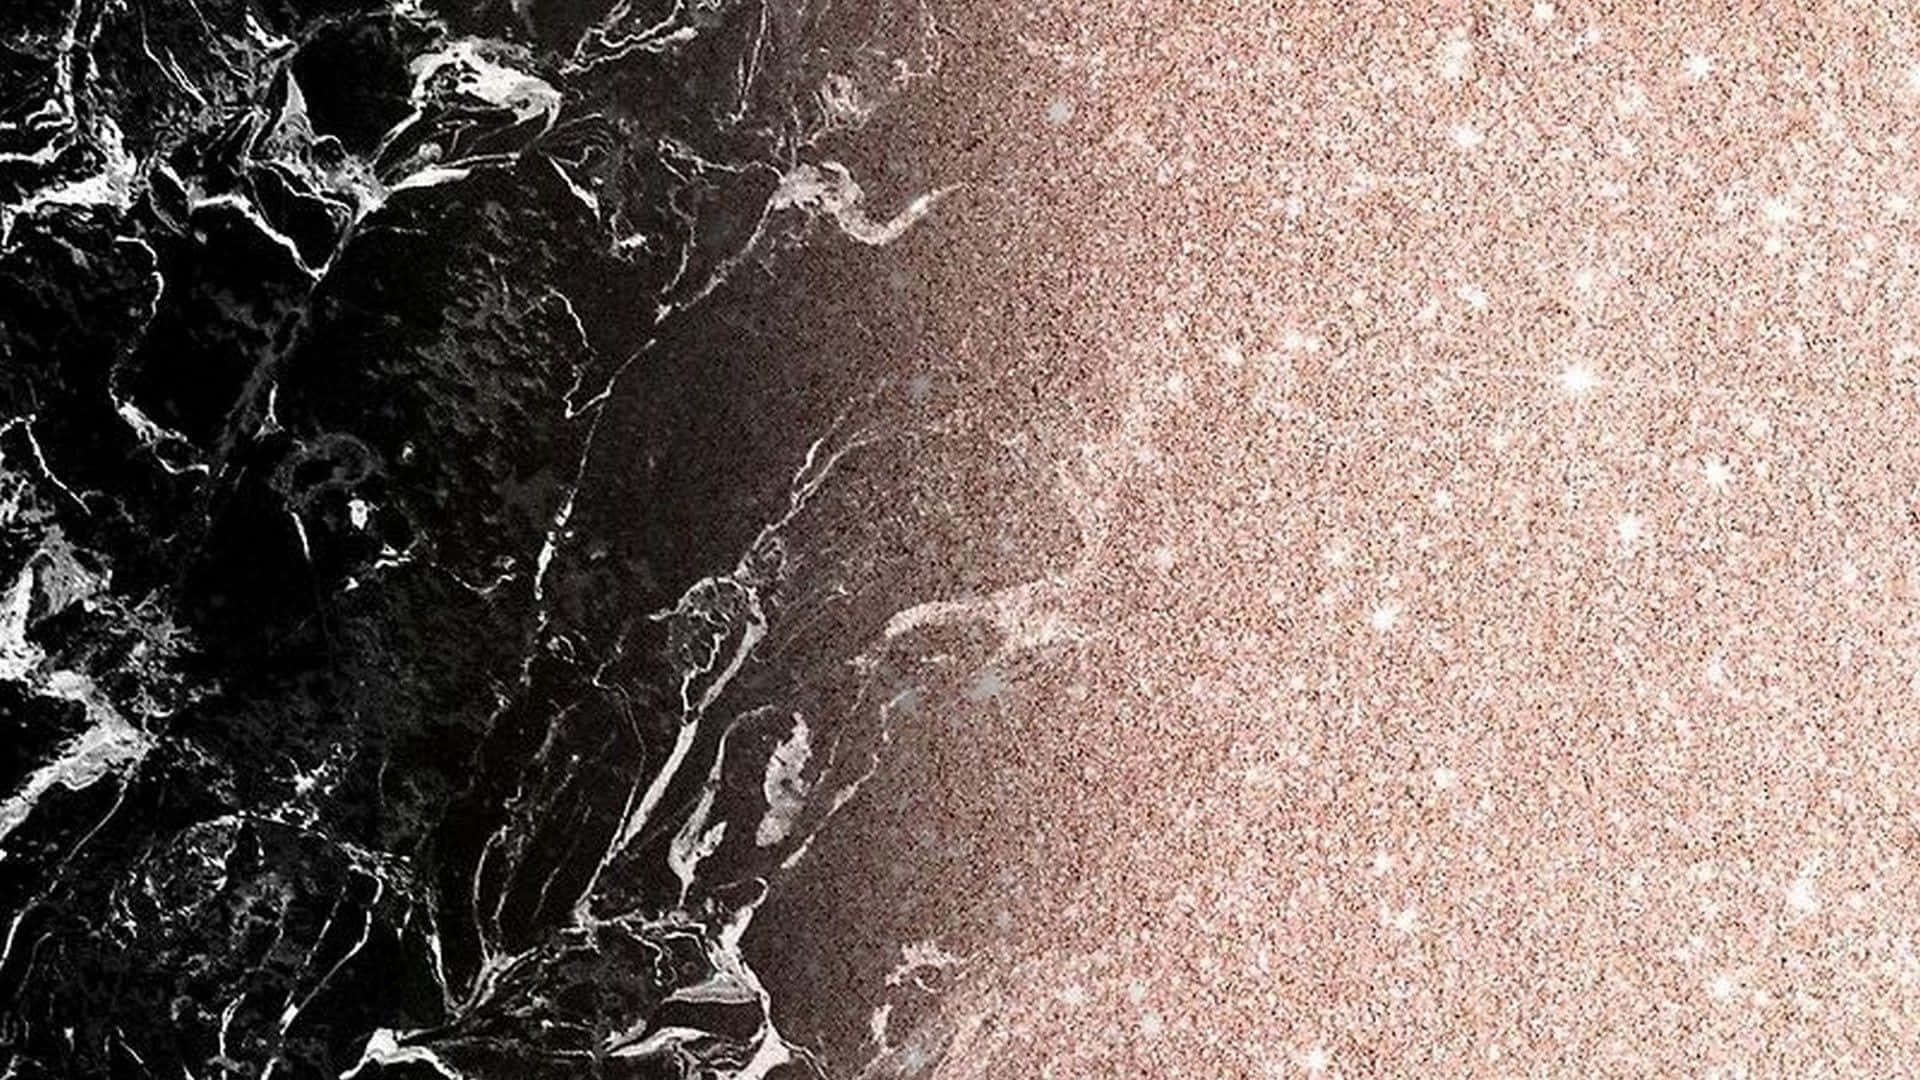 Gleaming Rose Gold Veins on a Black Marble Background Wallpaper